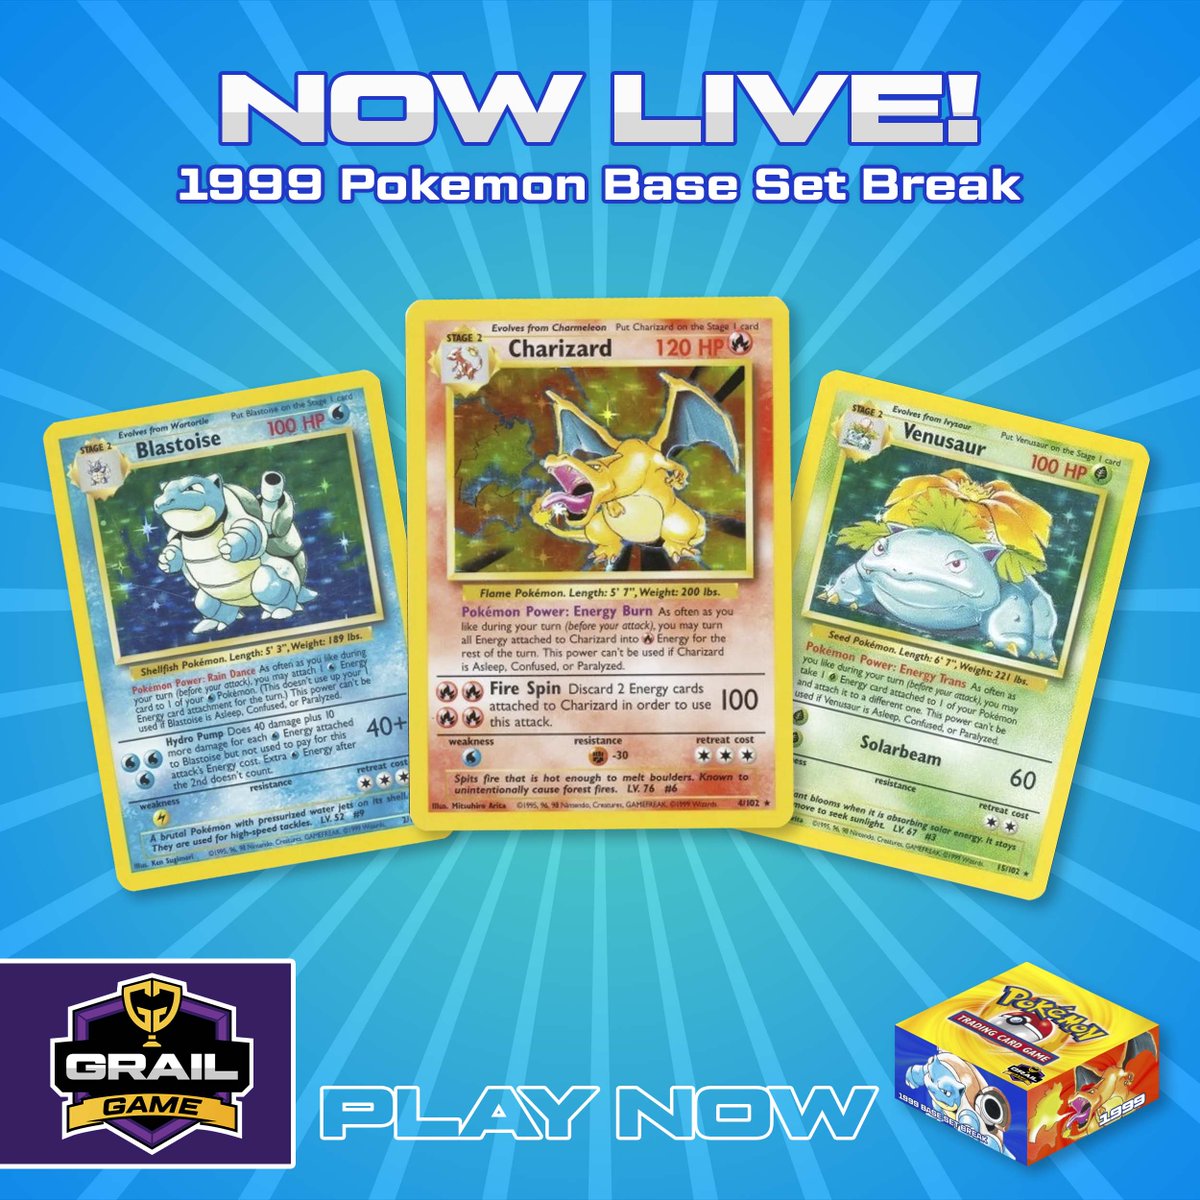 #GrailGamers! #PokémonFans! Pokémon Set Breaks #MysteryBox Game is NOW LIVE!! 🎉 ⁠ Not 1, or 2, but 3 #PokemonCard Set Breaks! (1999 Pokémon Base, 1998 Pokémon Rocket Japanese, and 25th Anniversary Pokémon Celebrations) Plus featuring favorites such as #Blastoise, #Mewtwo,…